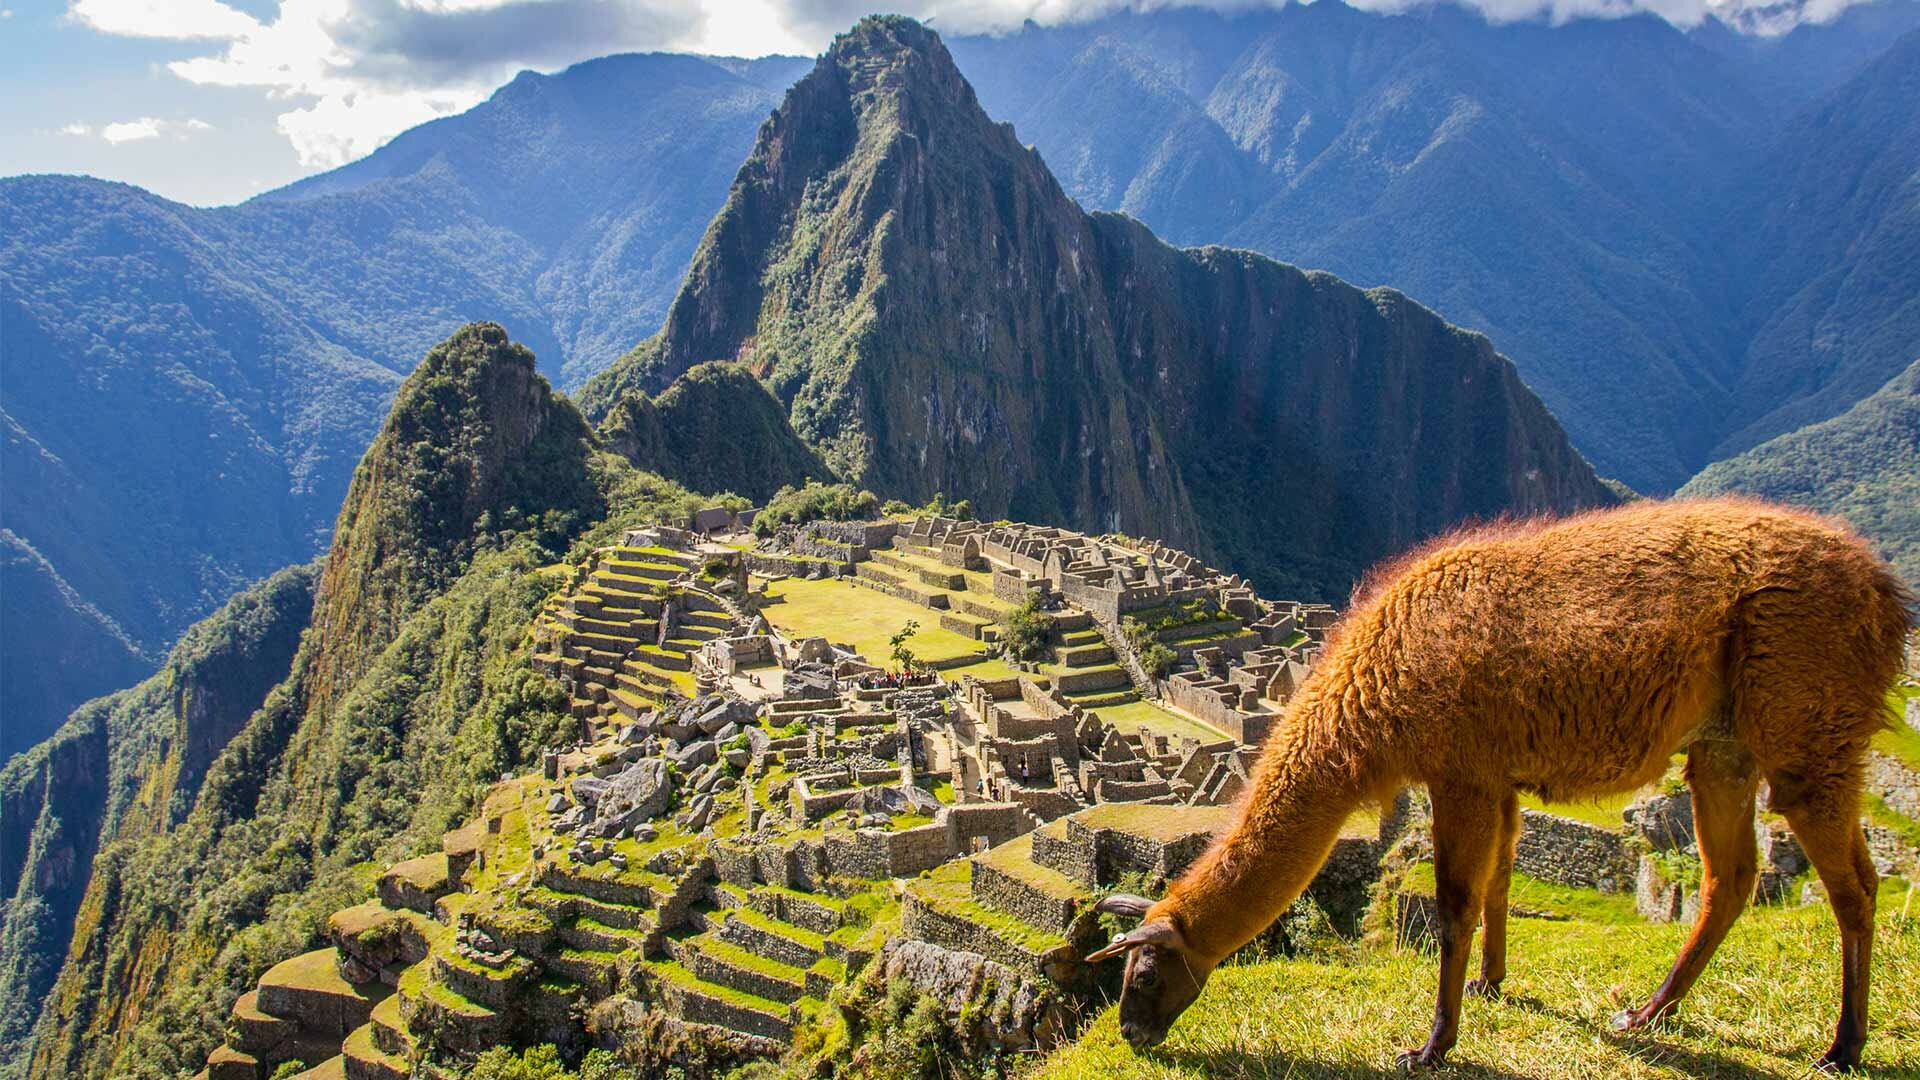 Machu Picchu: The end point of the most popular hike in South America, the Inca Trail. 1920x1080 Full HD Wallpaper.